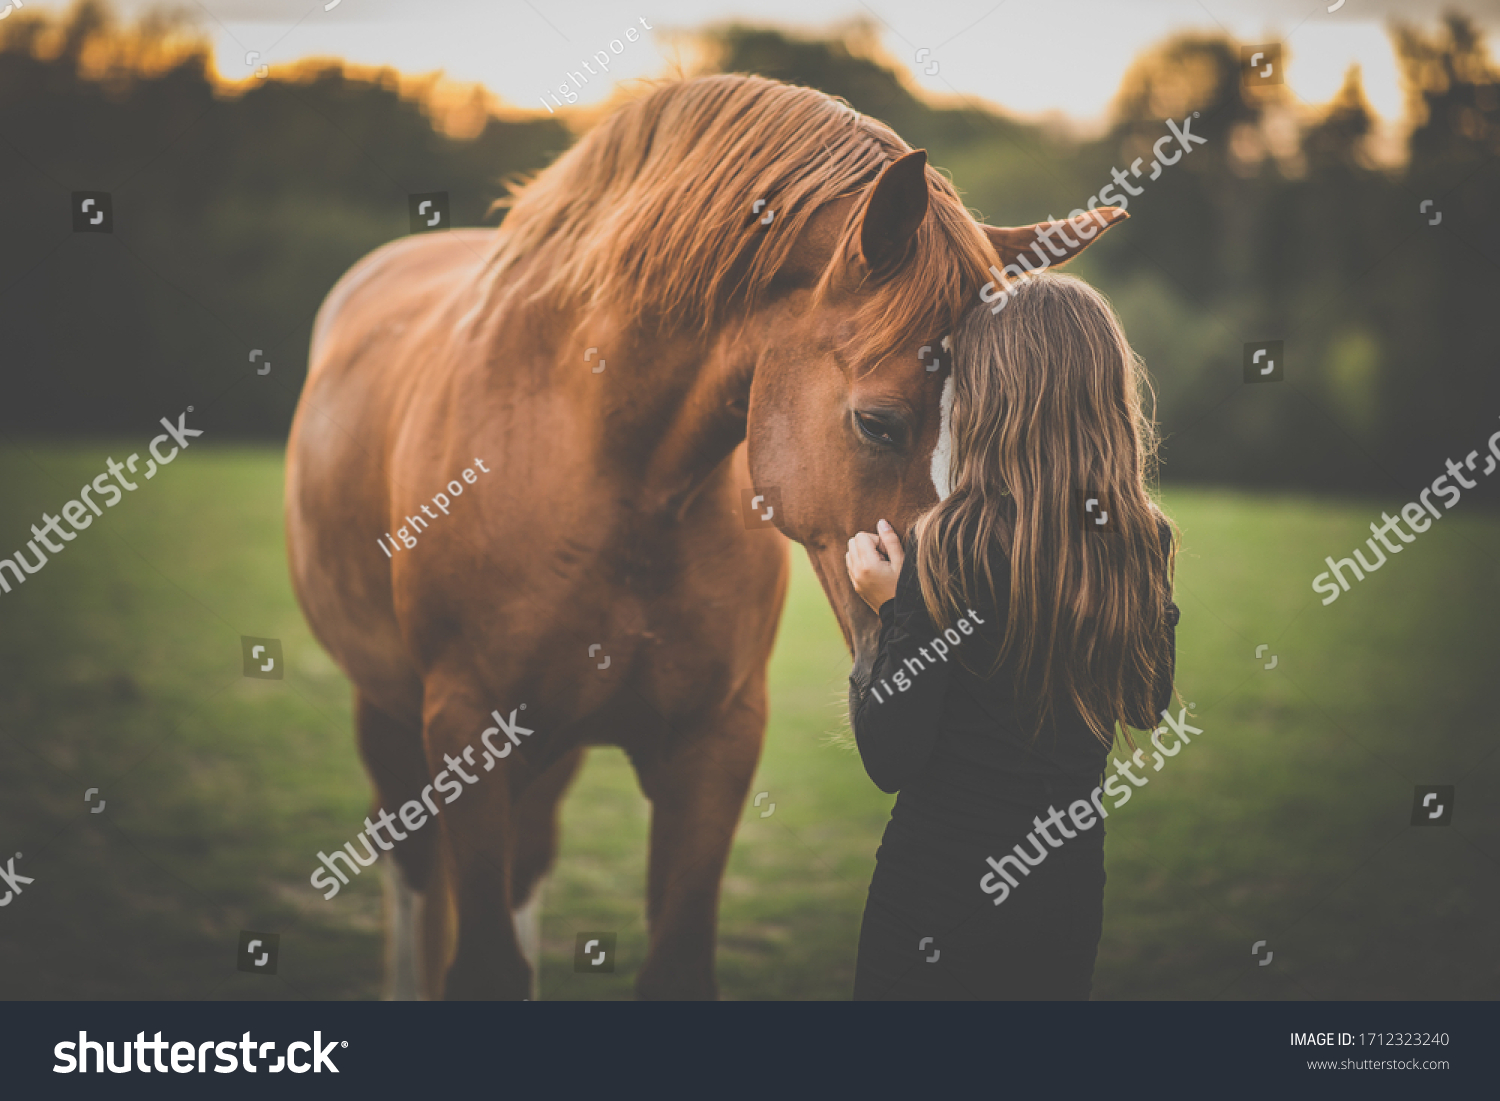 Cute little girl with her horse on a lovely meadow lit by warm evening light #1712323240